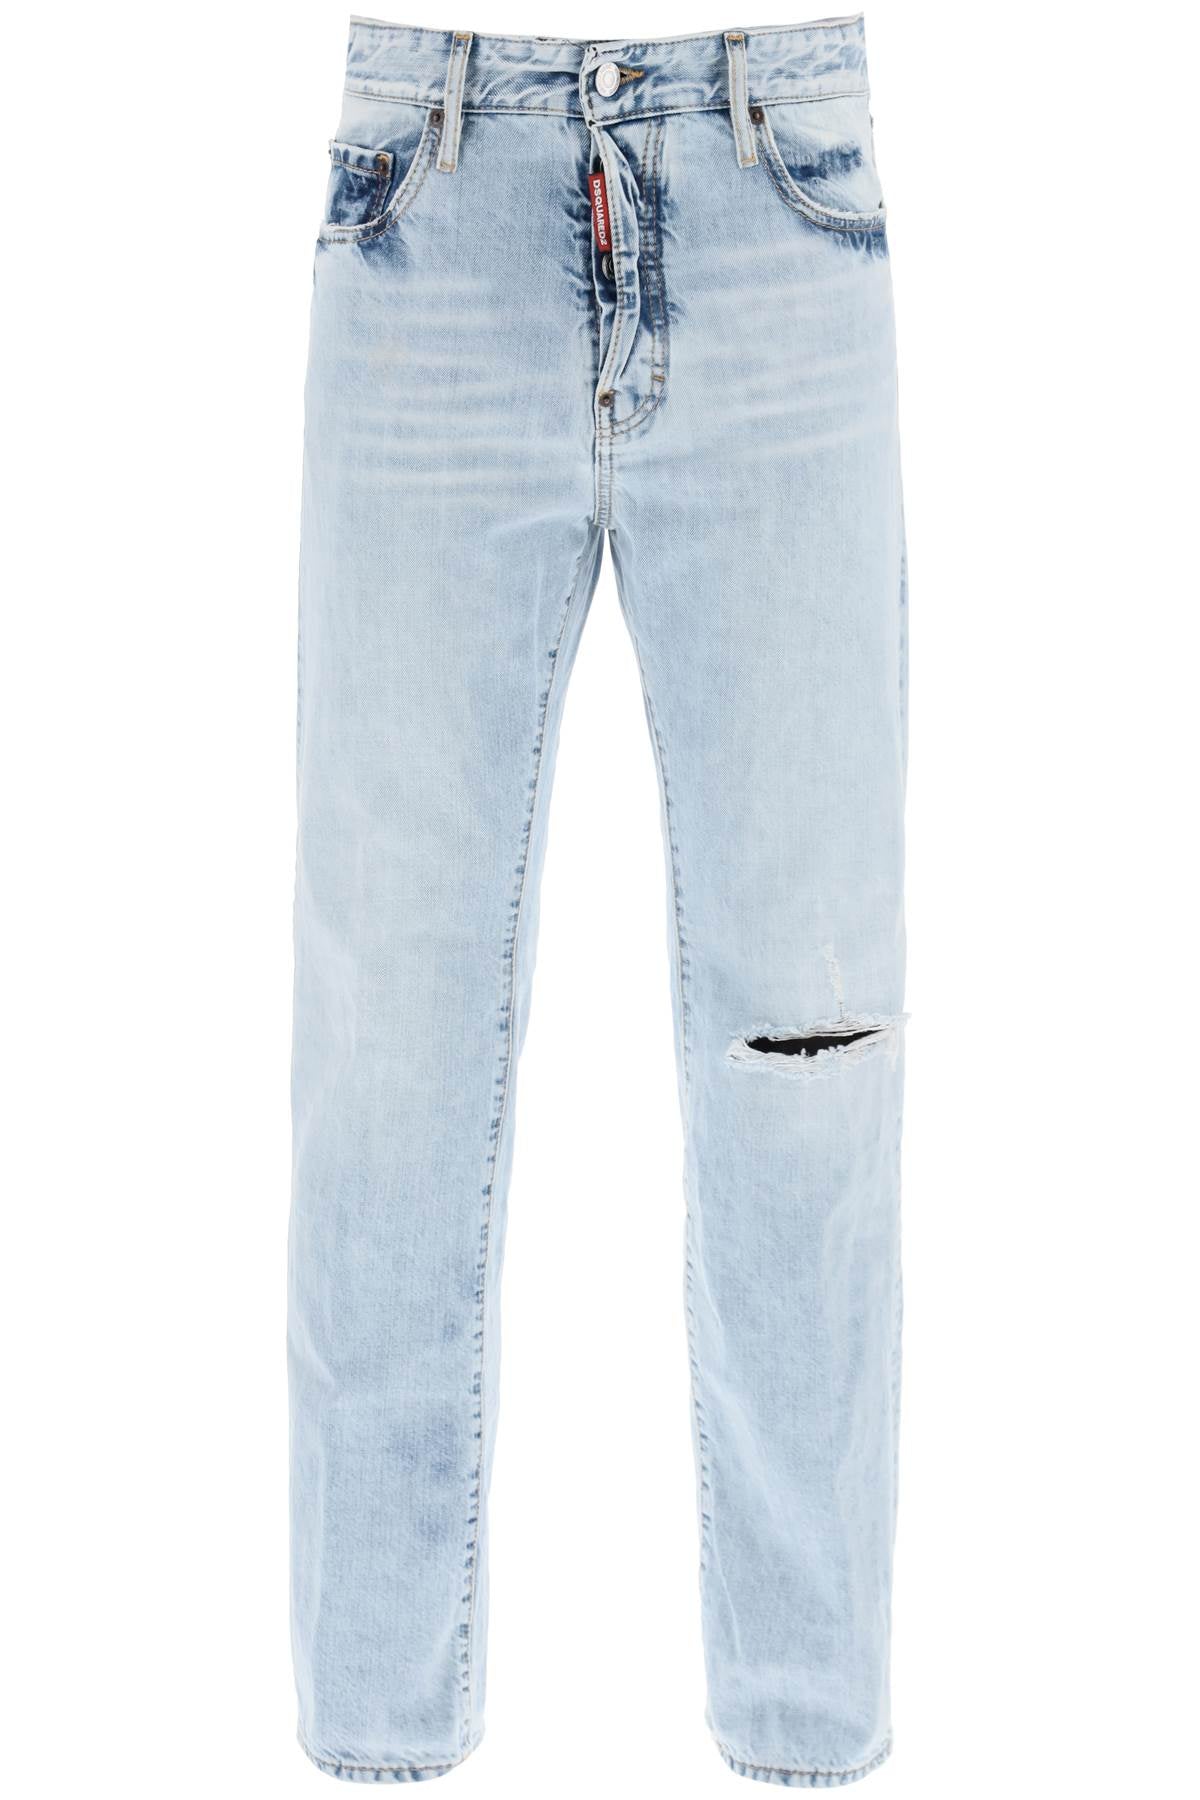 Dsquared2 light wash palm beach jeans with 642-0